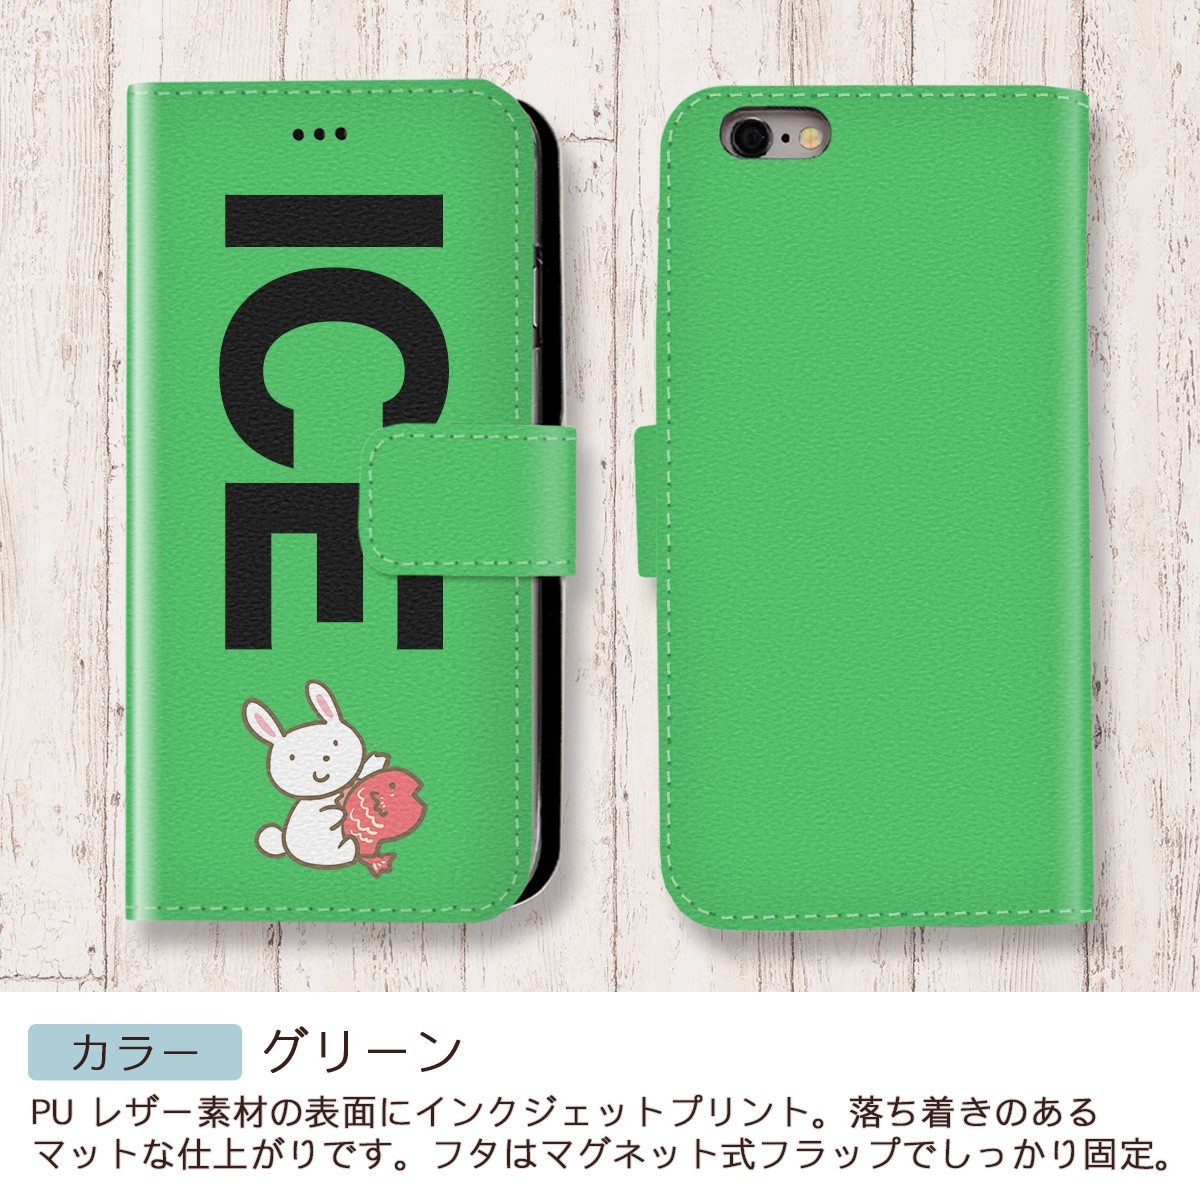 u.. interesting rabbit ... sea bream X XS case case iPhone X iPhone XS case notebook type iPhone lovely handsome me